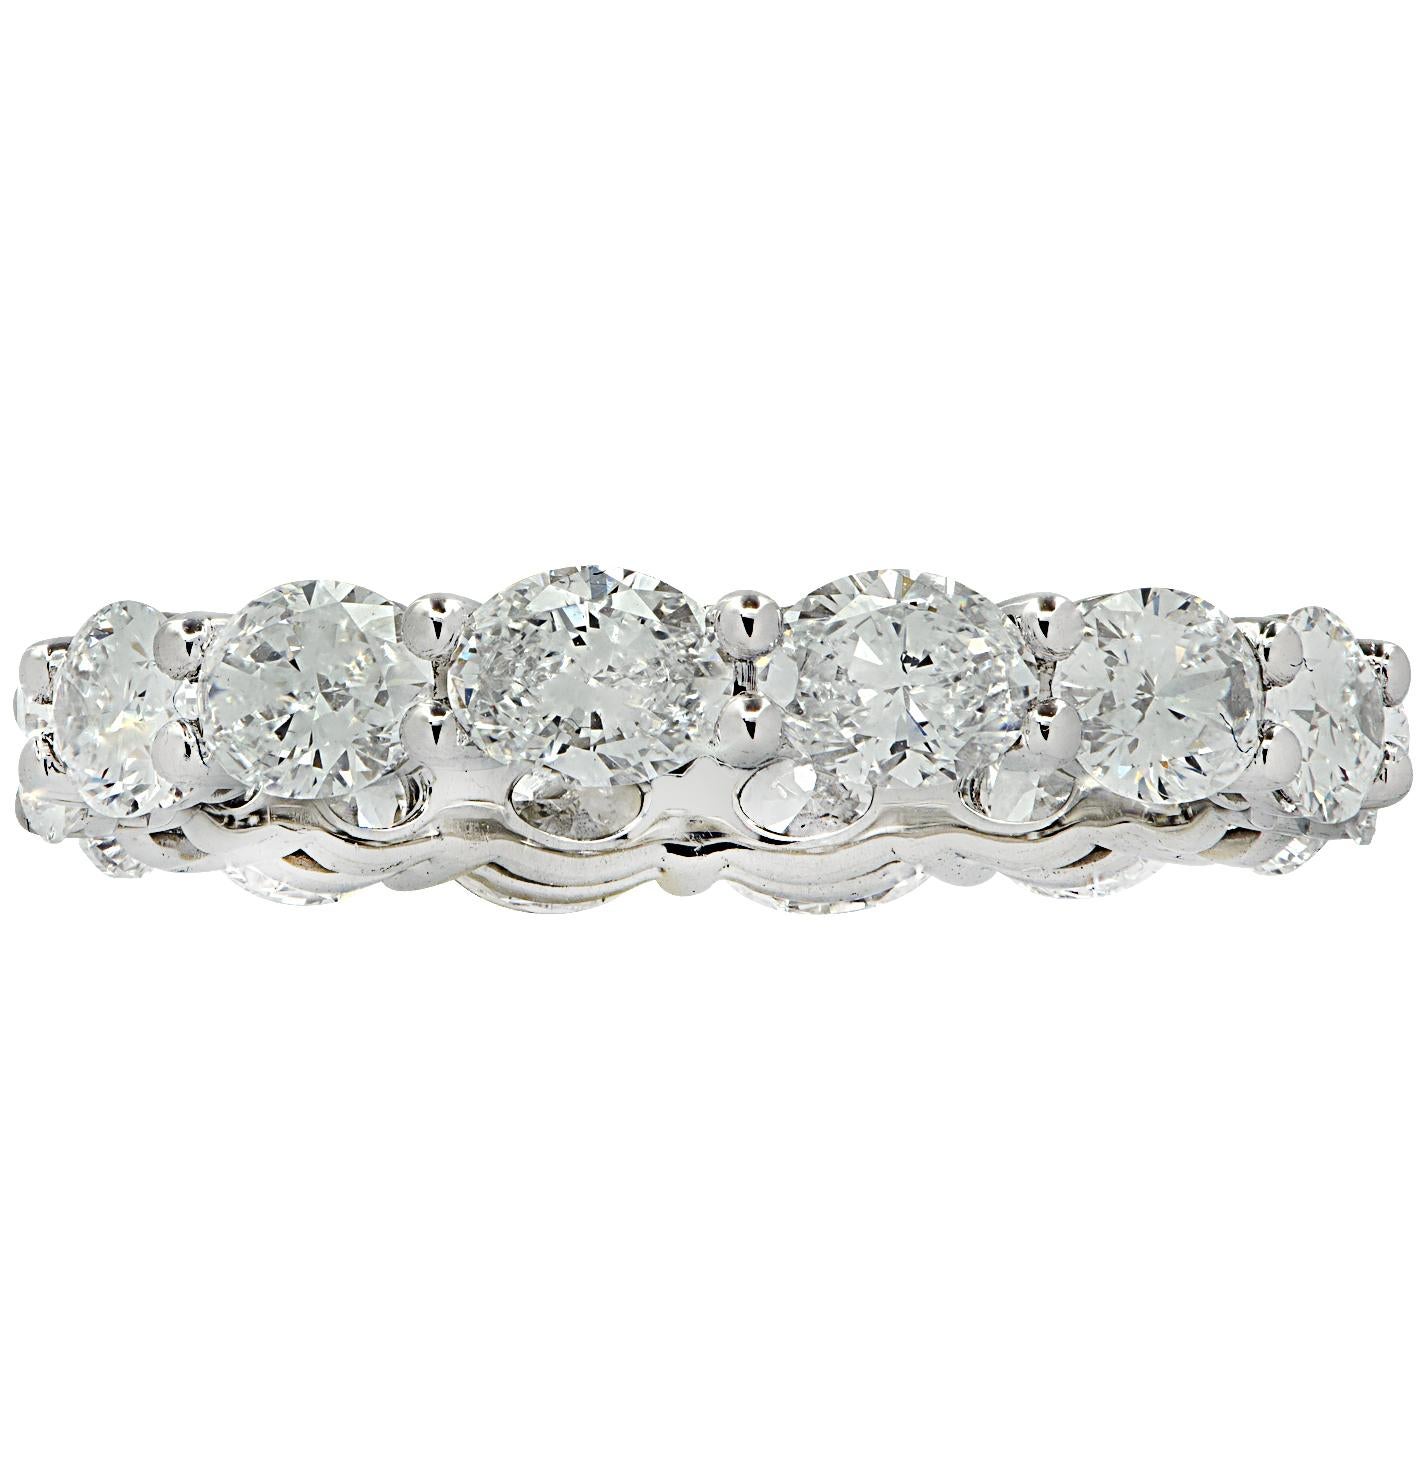 Stunning Vivid Diamonds East-West Eternity Band crafted in Platinum, featuring 14 oval cut diamonds weighing 2.64 carats total, D-E color, VVS-VS clarity. These fine diamonds were carefully matched and are seamlessly set, in an east-west direction,